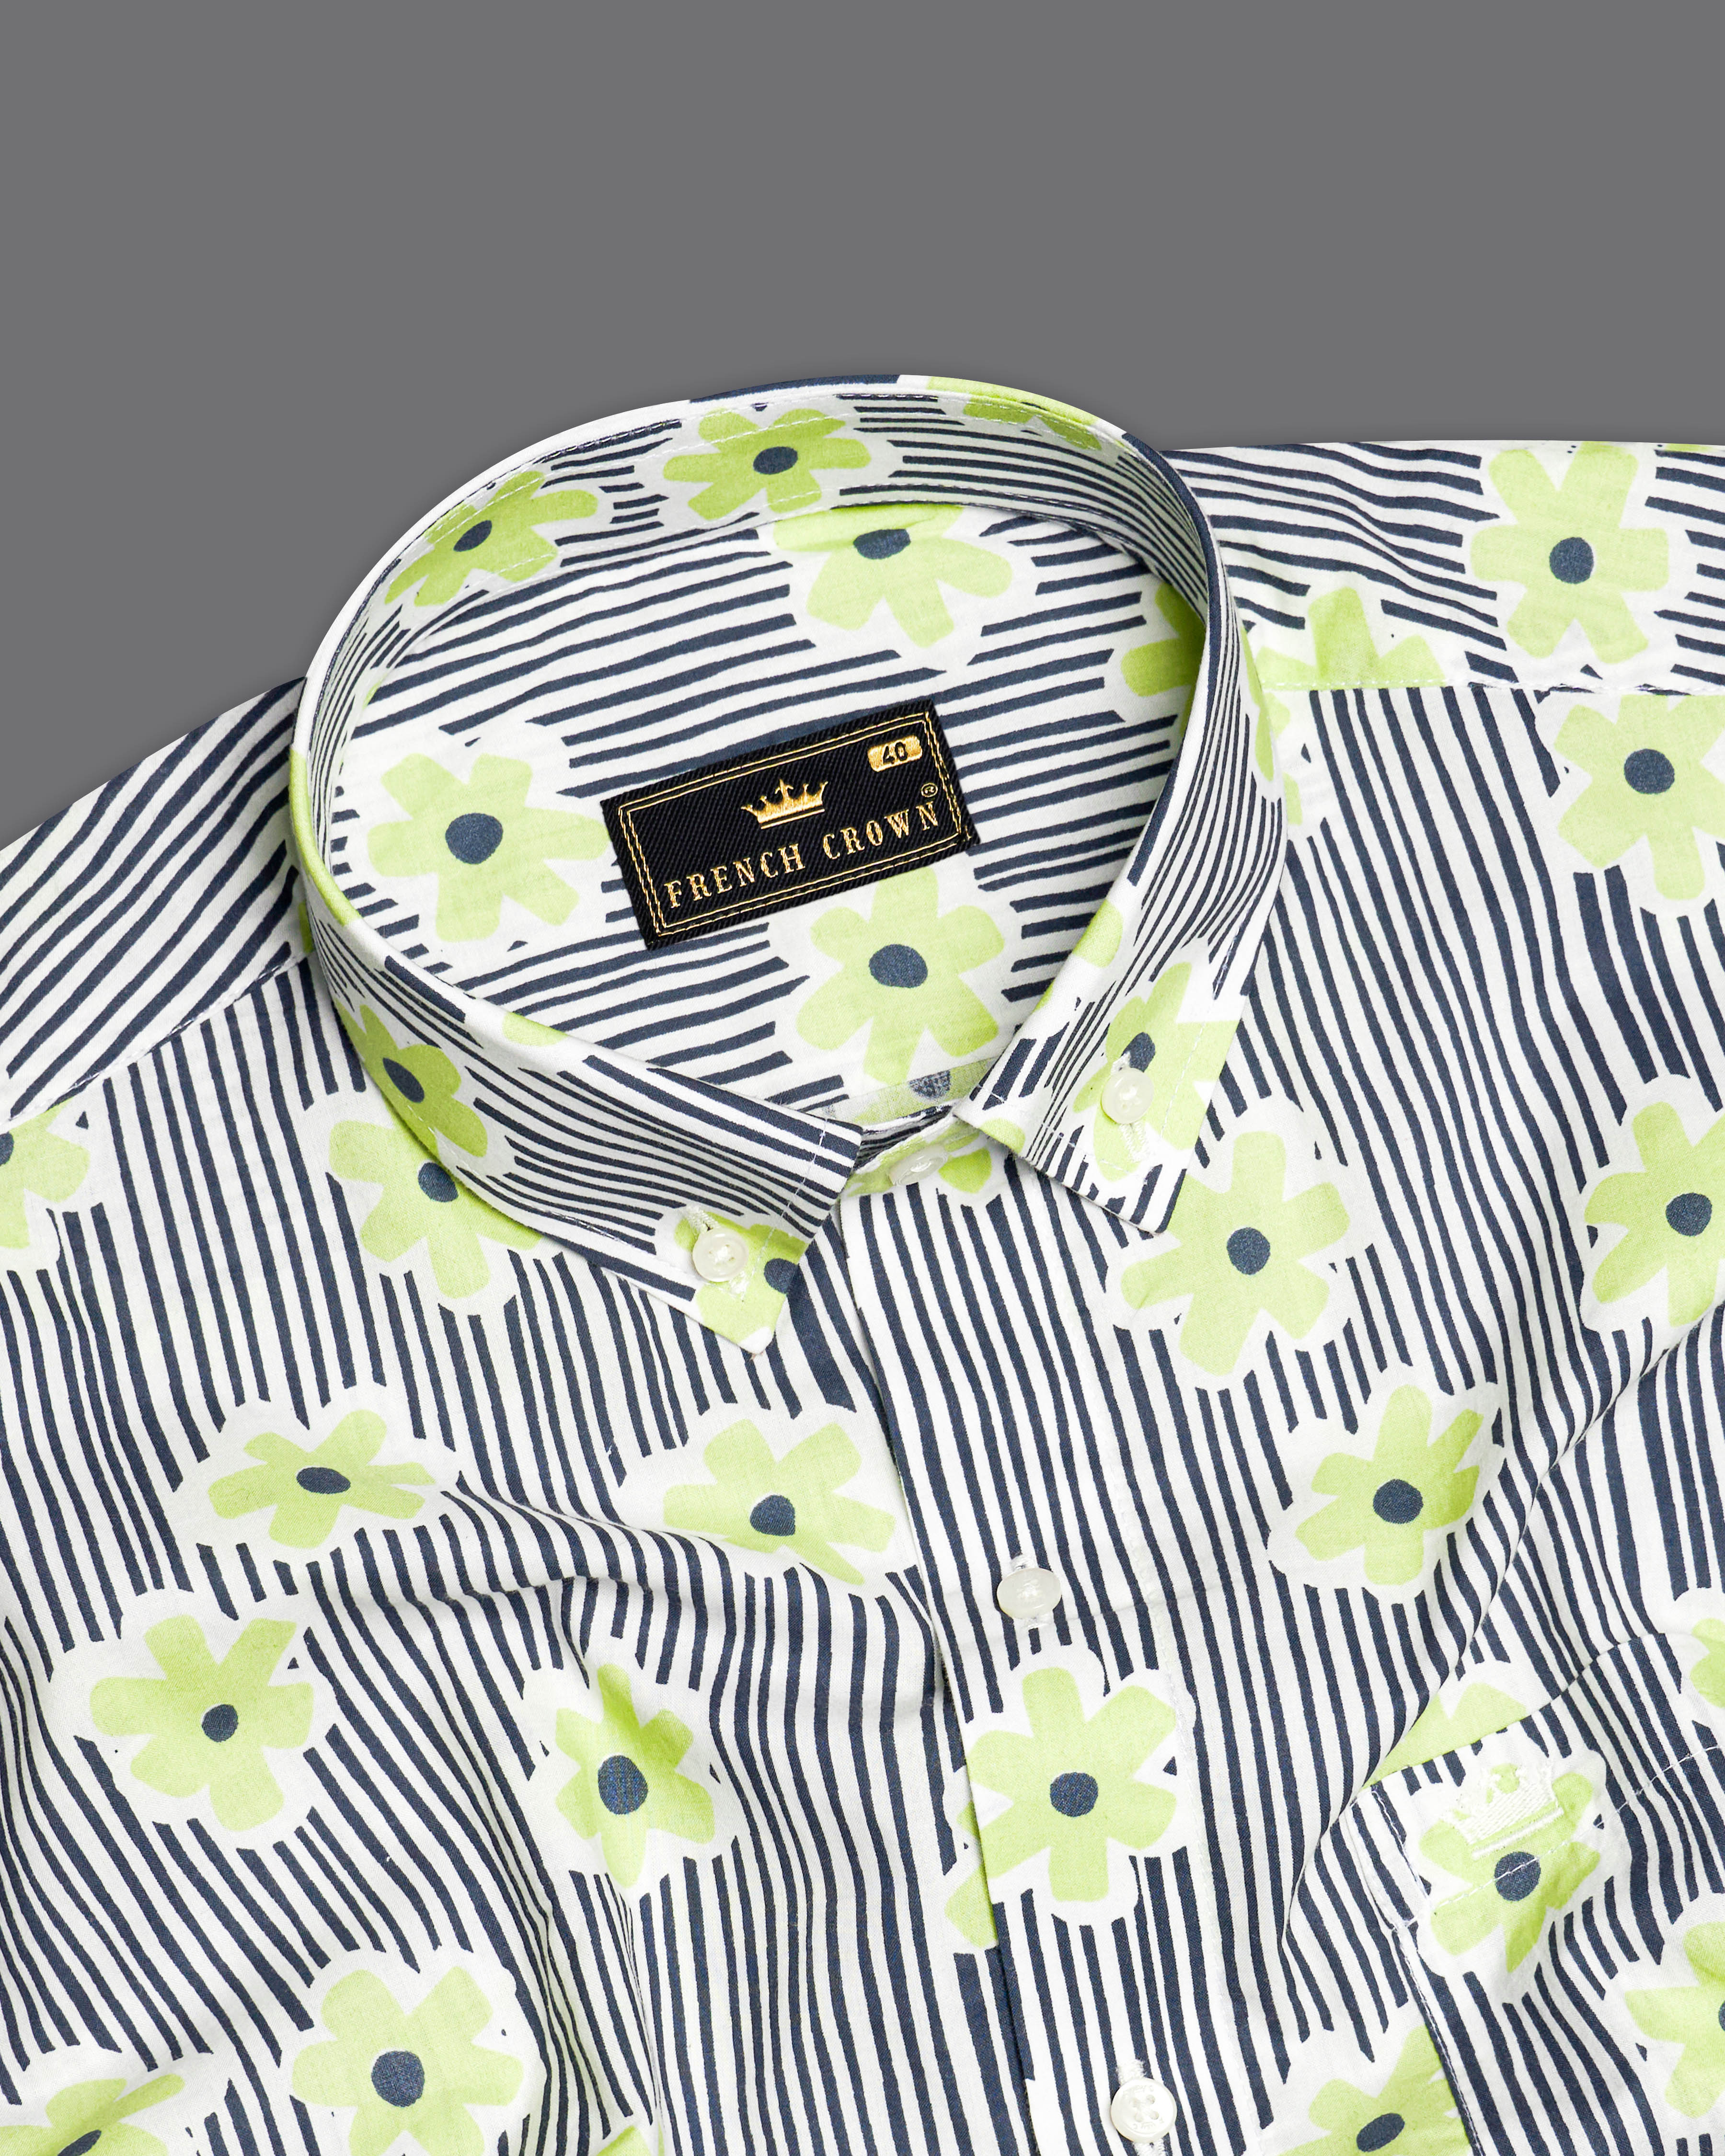 Bright White Striped with Floral Printed Premium Cotton Shirt 9586-BD-38,9586-BD-H-38,9586-BD-39,9586-BD-H-39,9586-BD-40,9586-BD-H-40,9586-BD-42,9586-BD-H-42,9586-BD-44,9586-BD-H-44,9586-BD-46,9586-BD-H-46,9586-BD-48,9586-BD-H-48,9586-BD-50,9586-BD-H-50,9586-BD-52,9586-BD-H-52